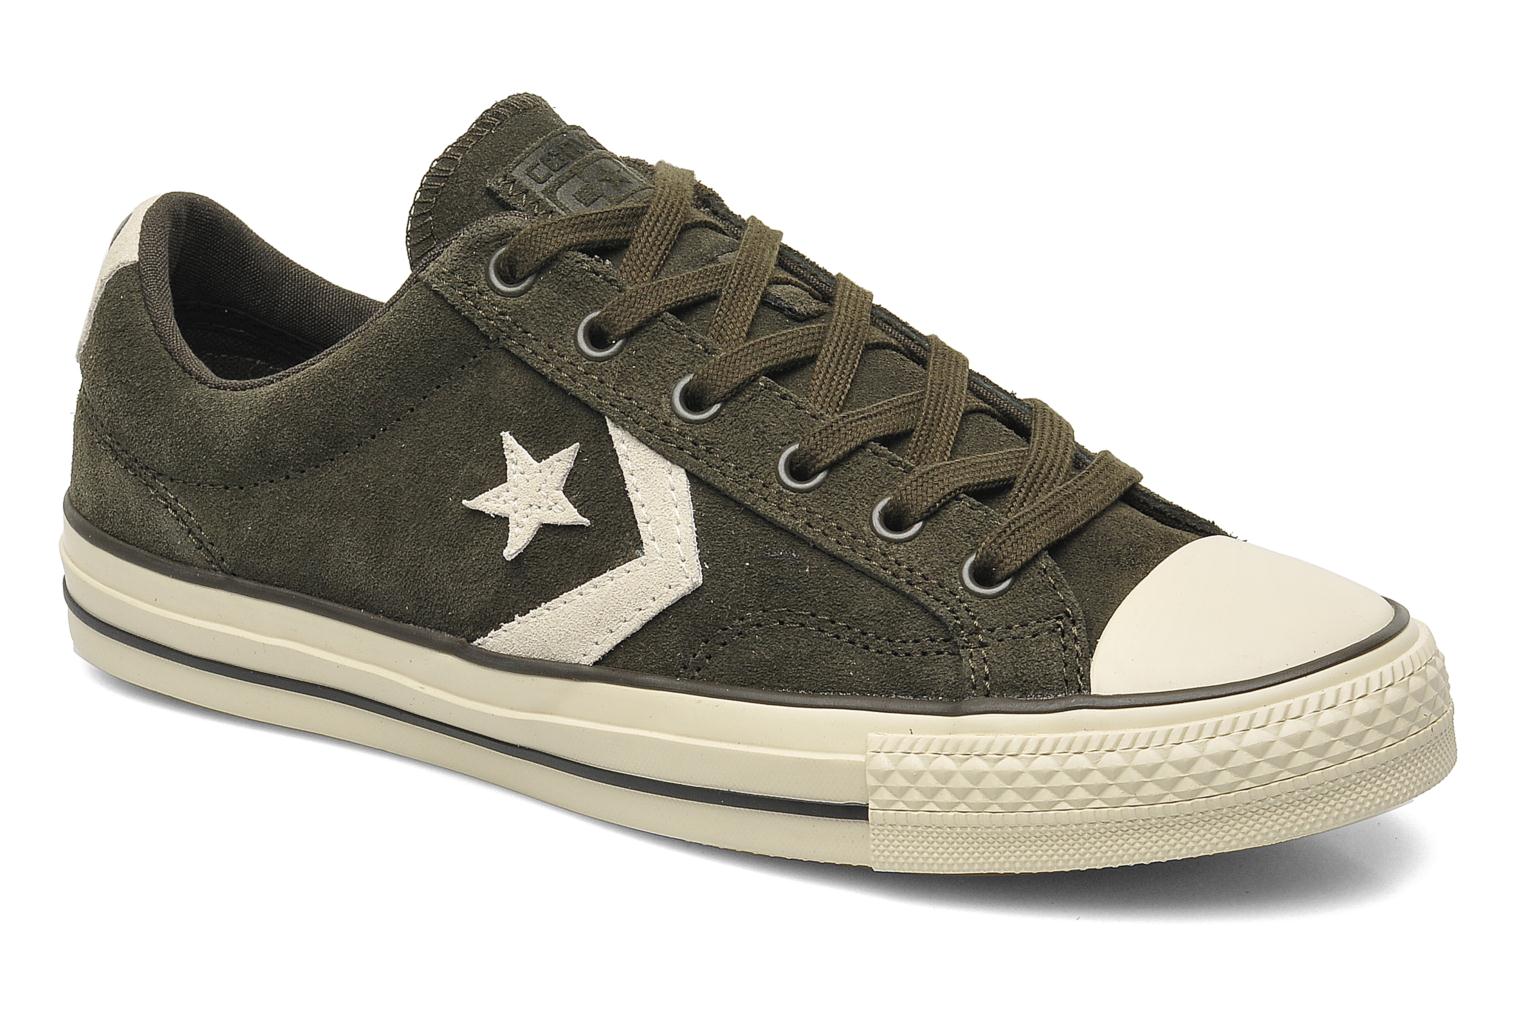 Converse Star Player Ox Donna Rose Shop, 54% OFF | www ... تواي